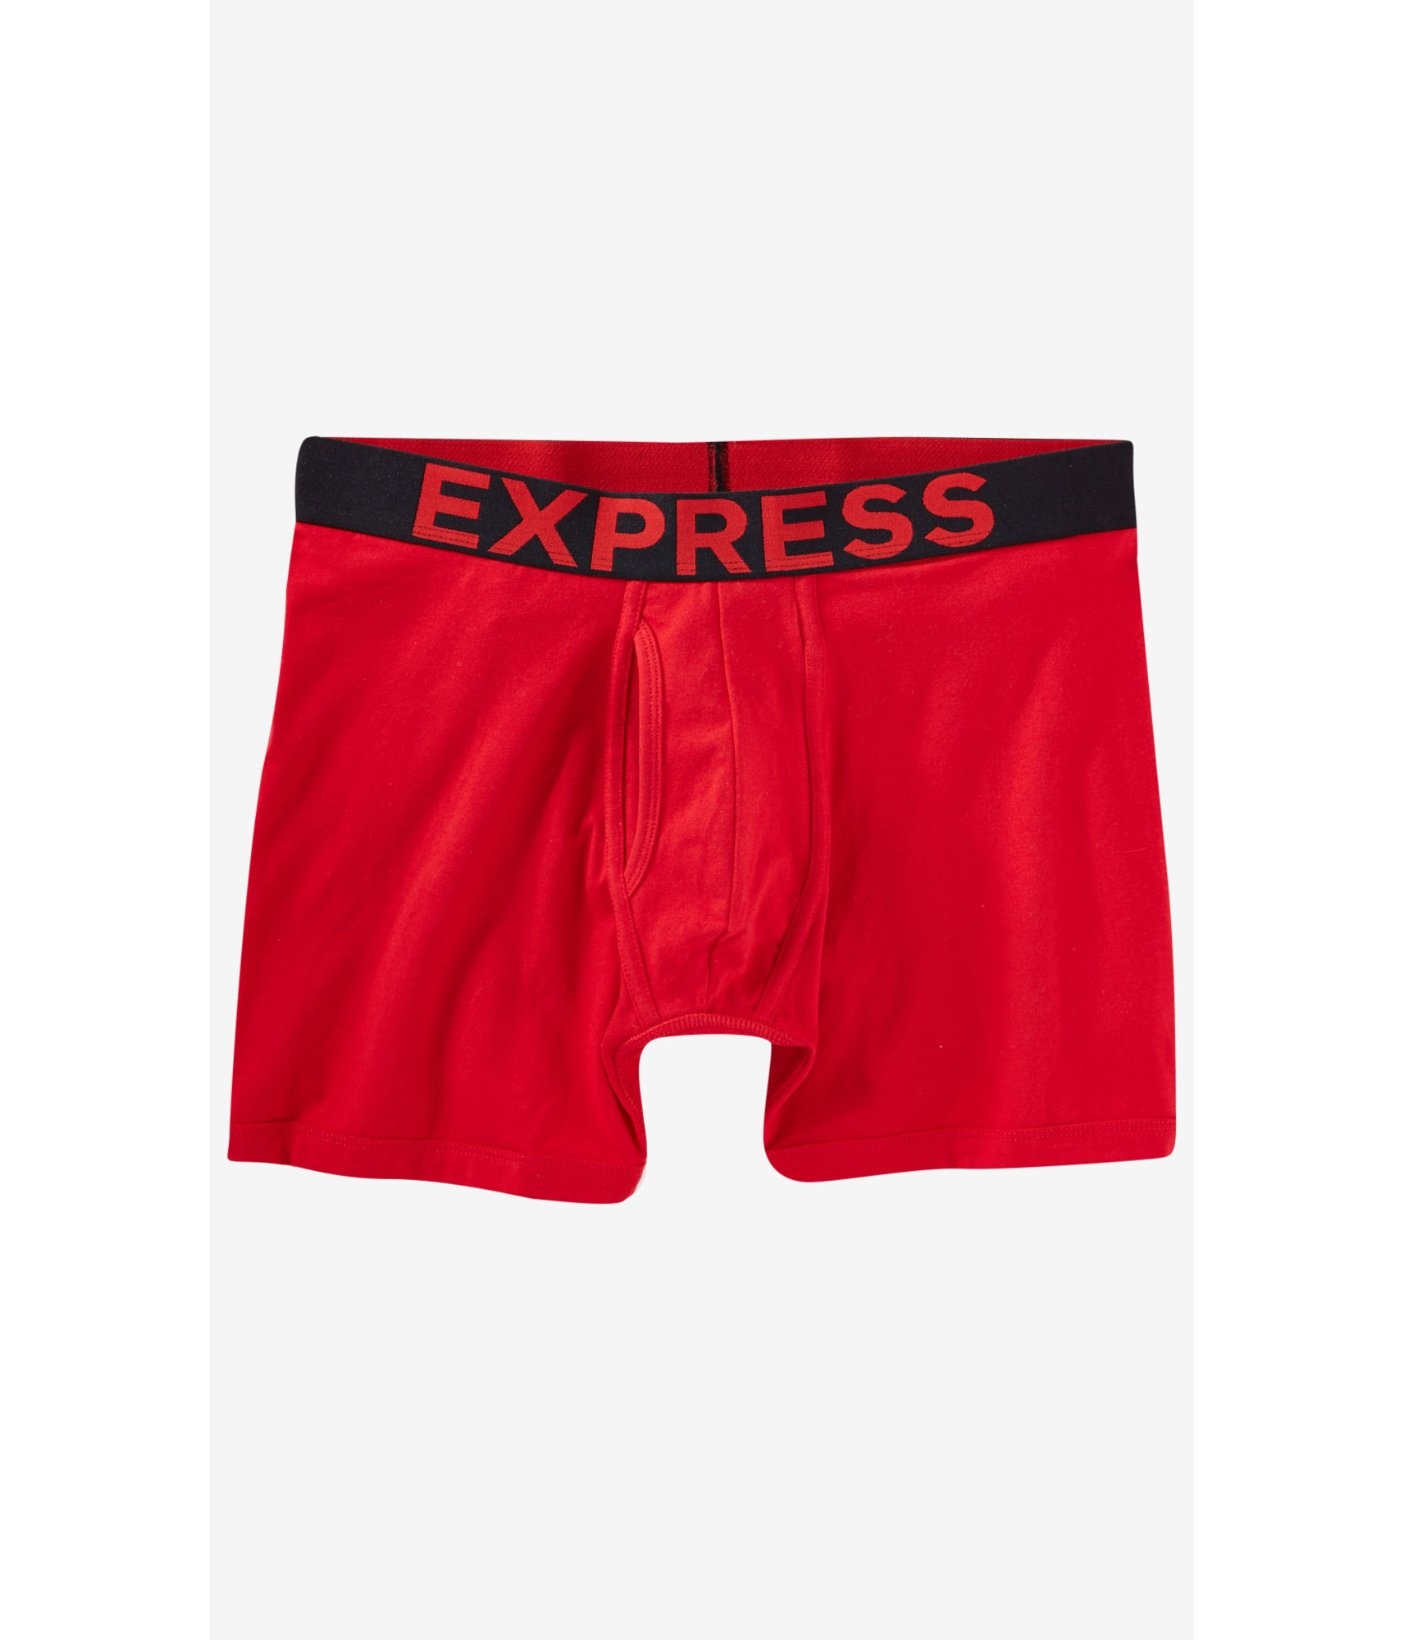 Lyst   Express Color Block Knit Boxer Briefs in Red for Men